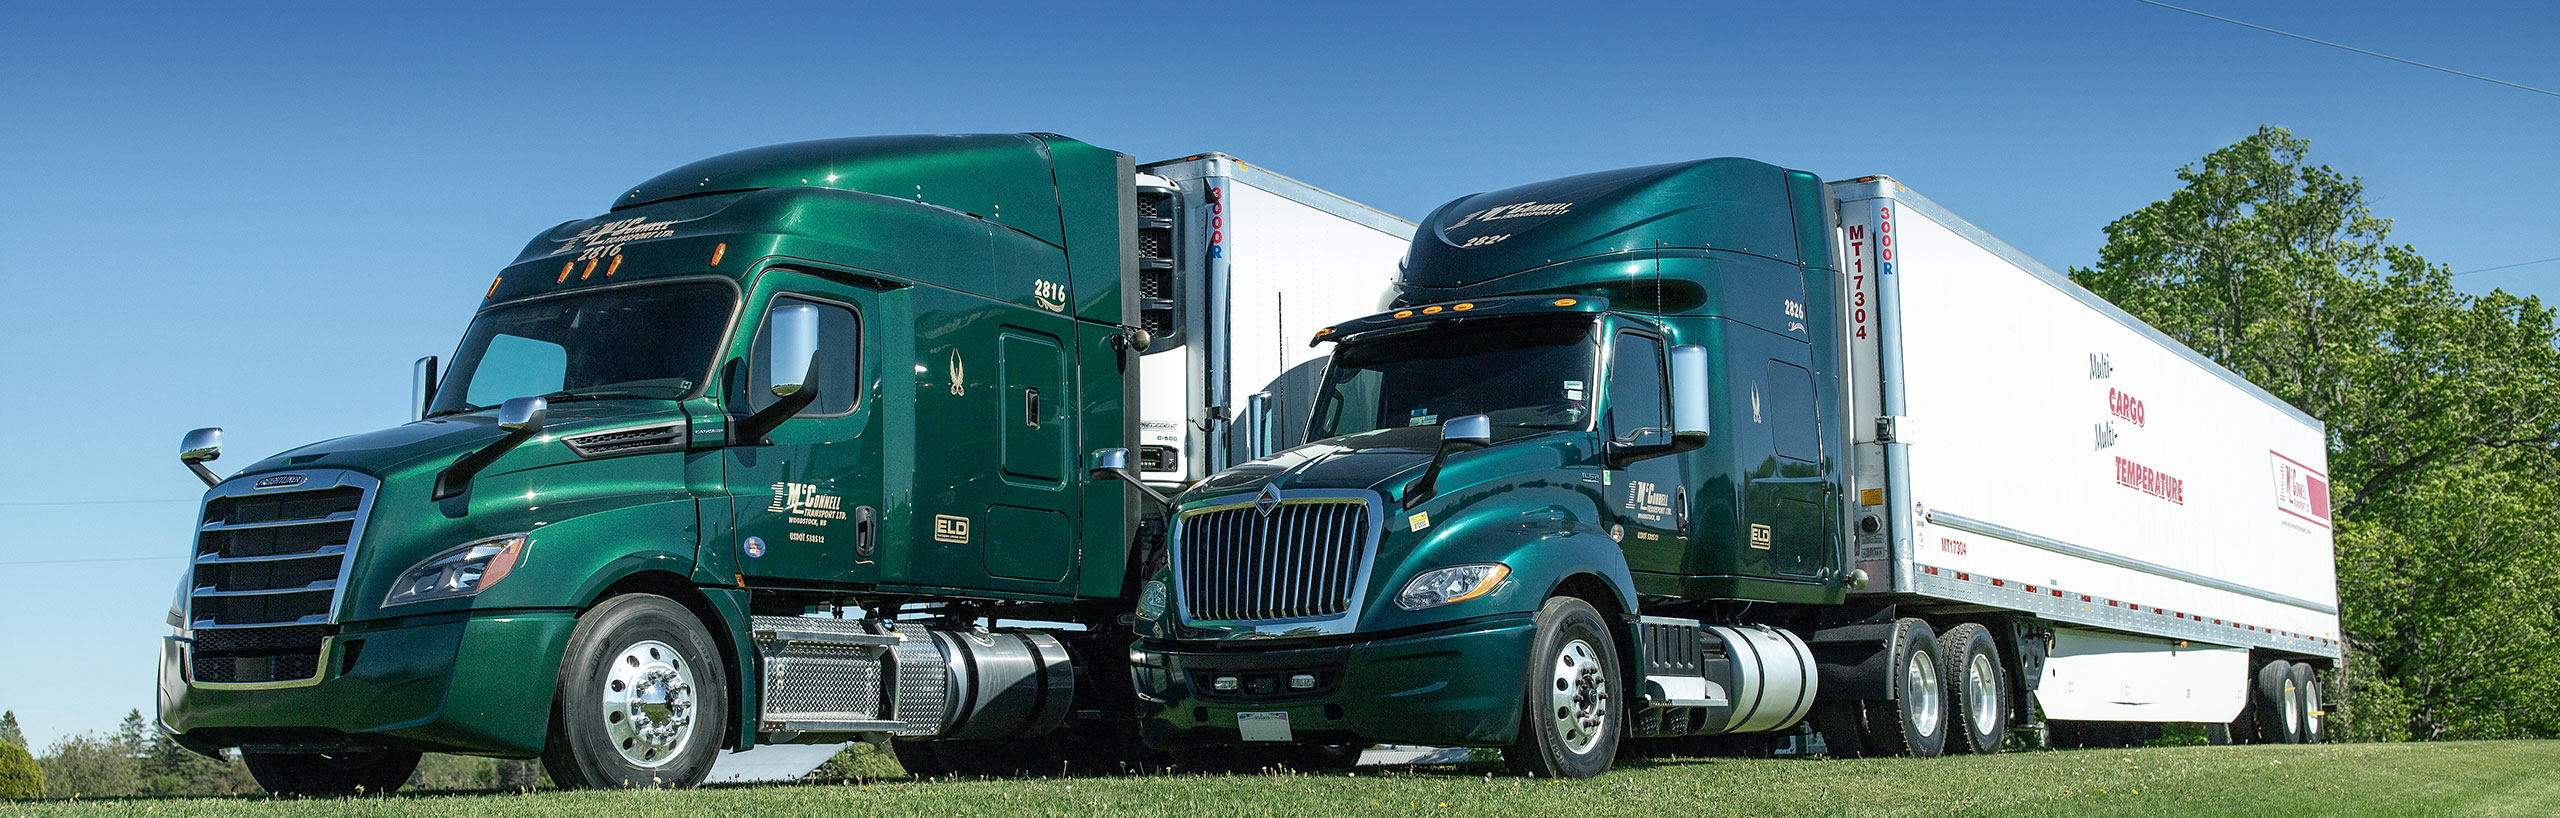 Two McConnell Transport trucks parked side by side on grass, with trees in the background